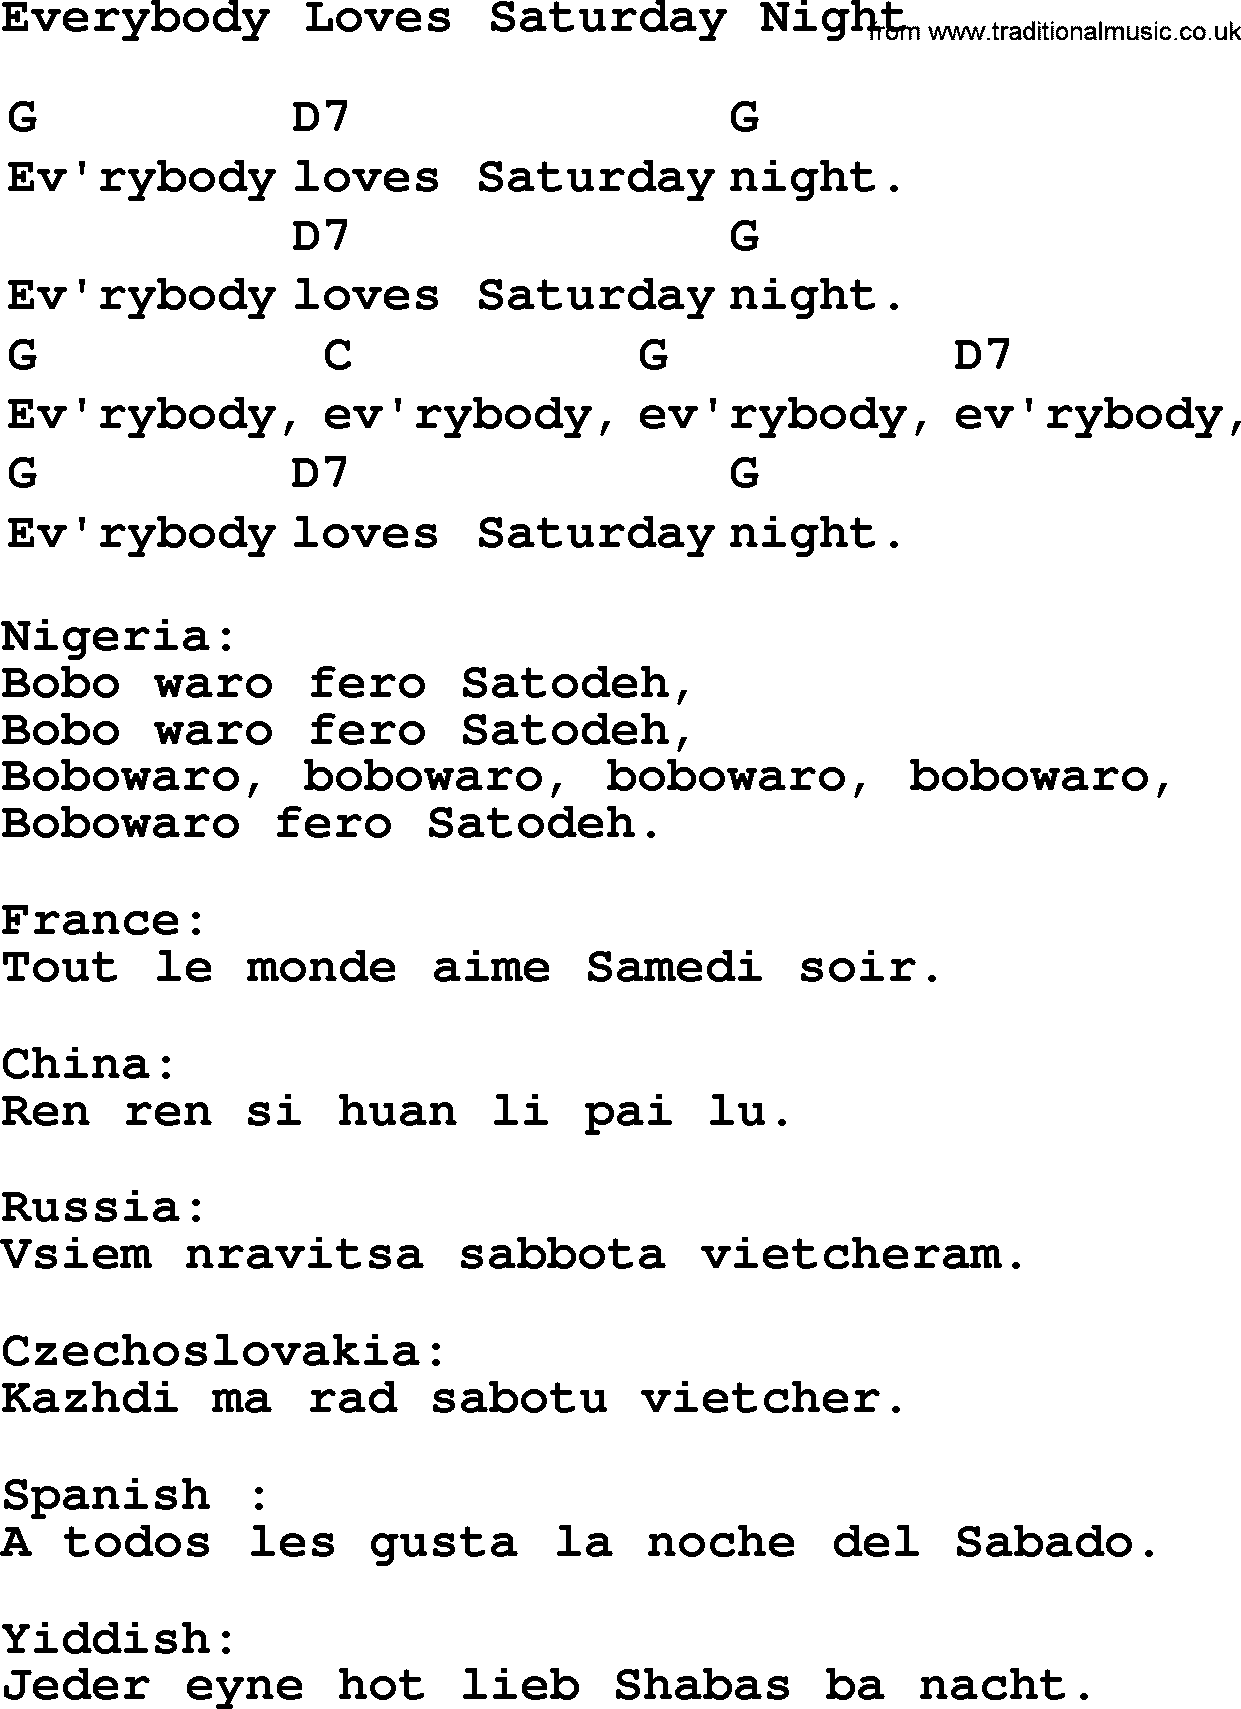 Top 1000 Most Popular Folk and Old-time Songs: Everybody Loves Saturday Night, lyrics and chords